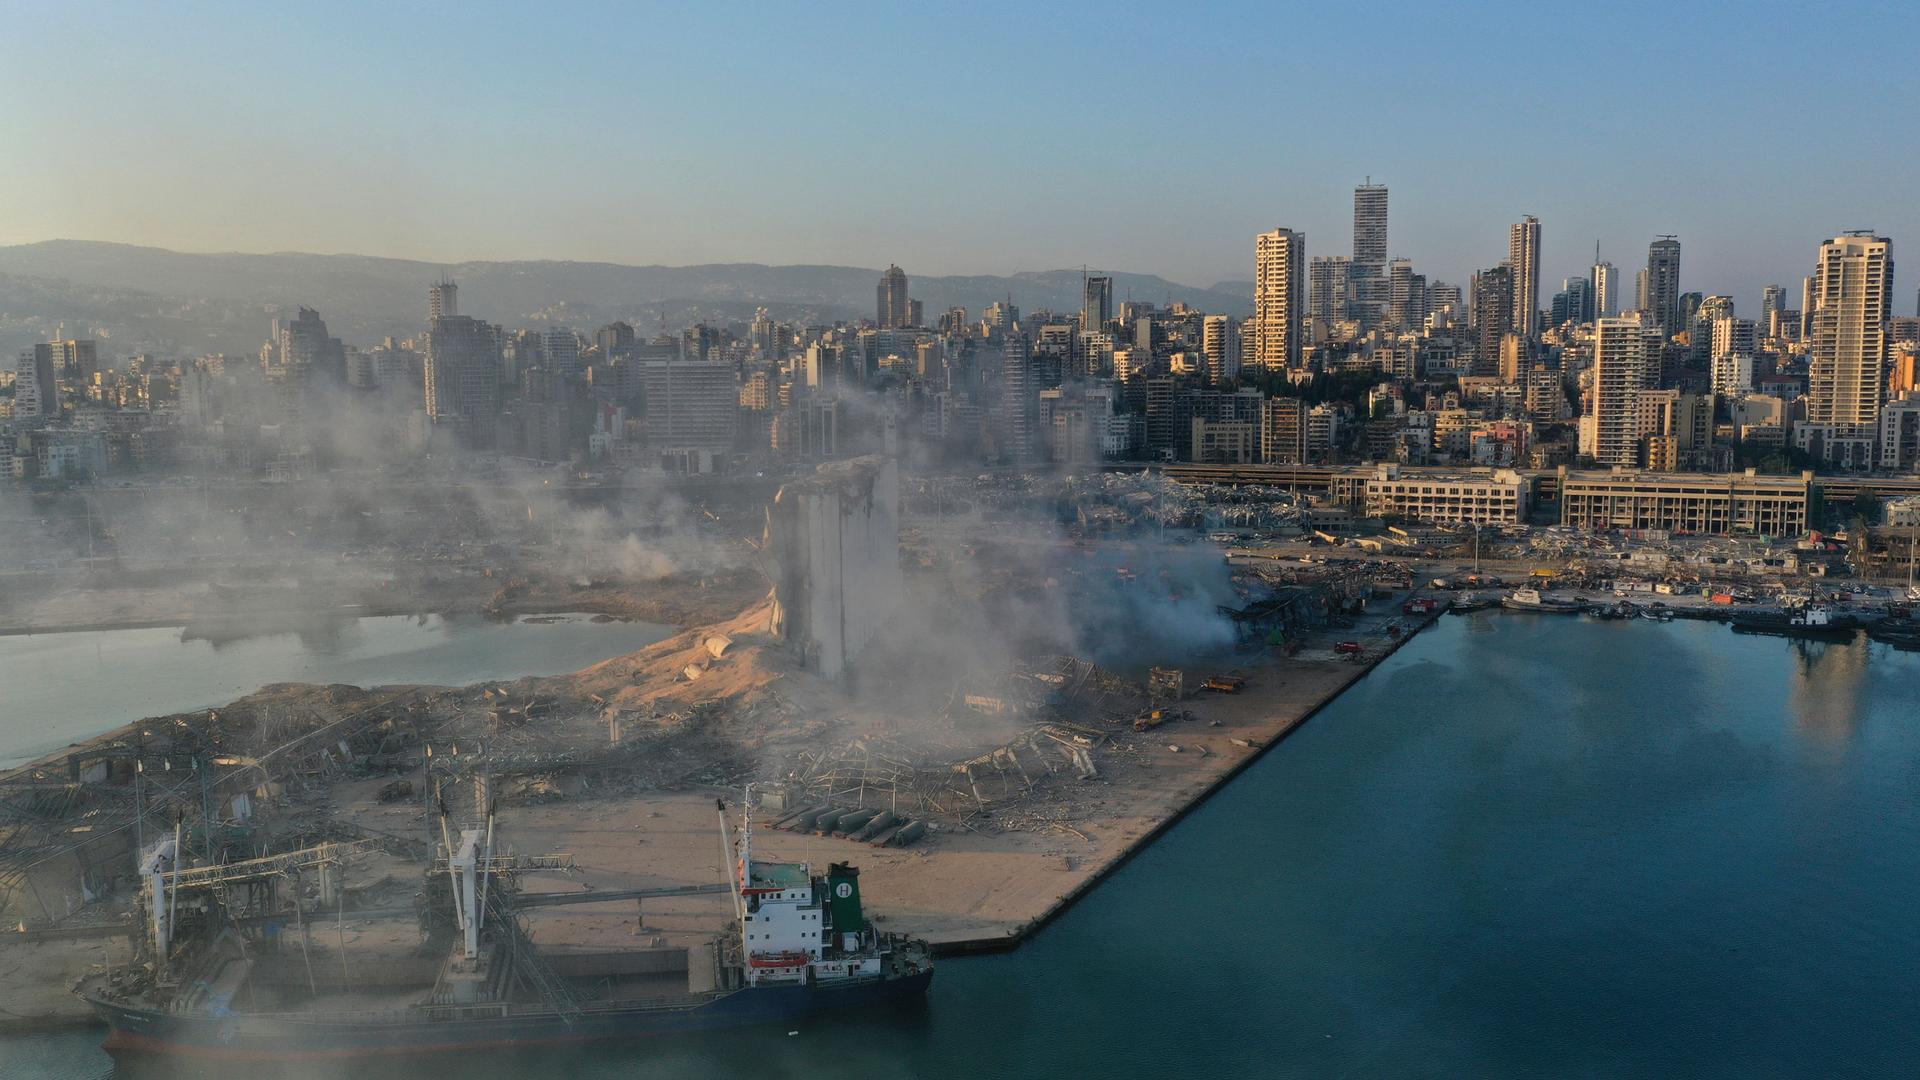 A view of Beirut's port is shown, flattened from an explosion and smoke rising from the rubble